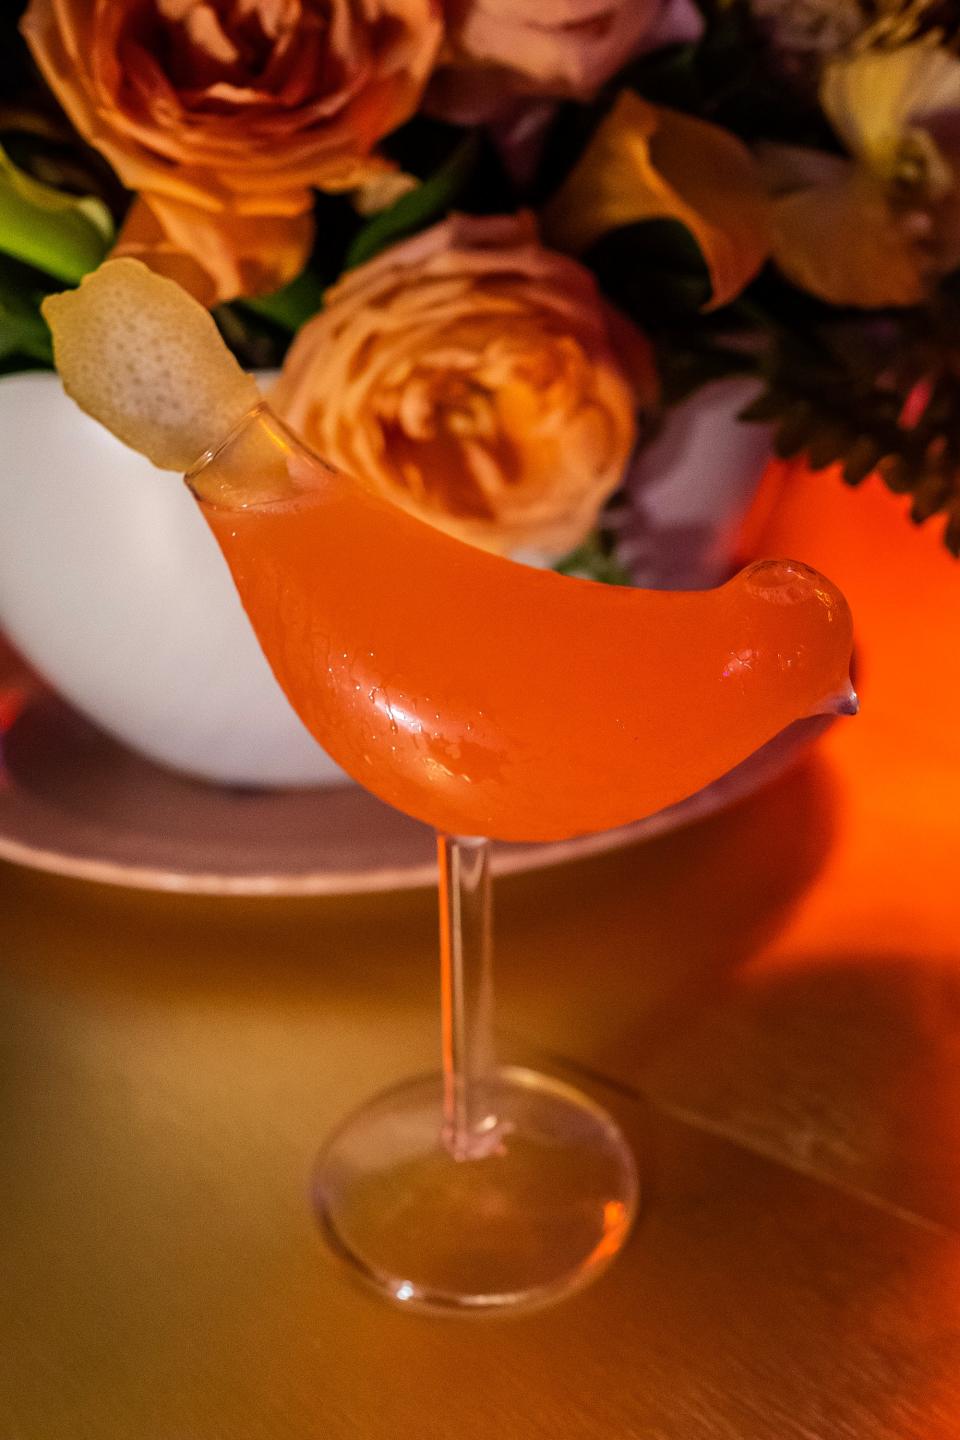 Drinking out of a bird-shaped glass is half the fun of ordering the "Lovebird."